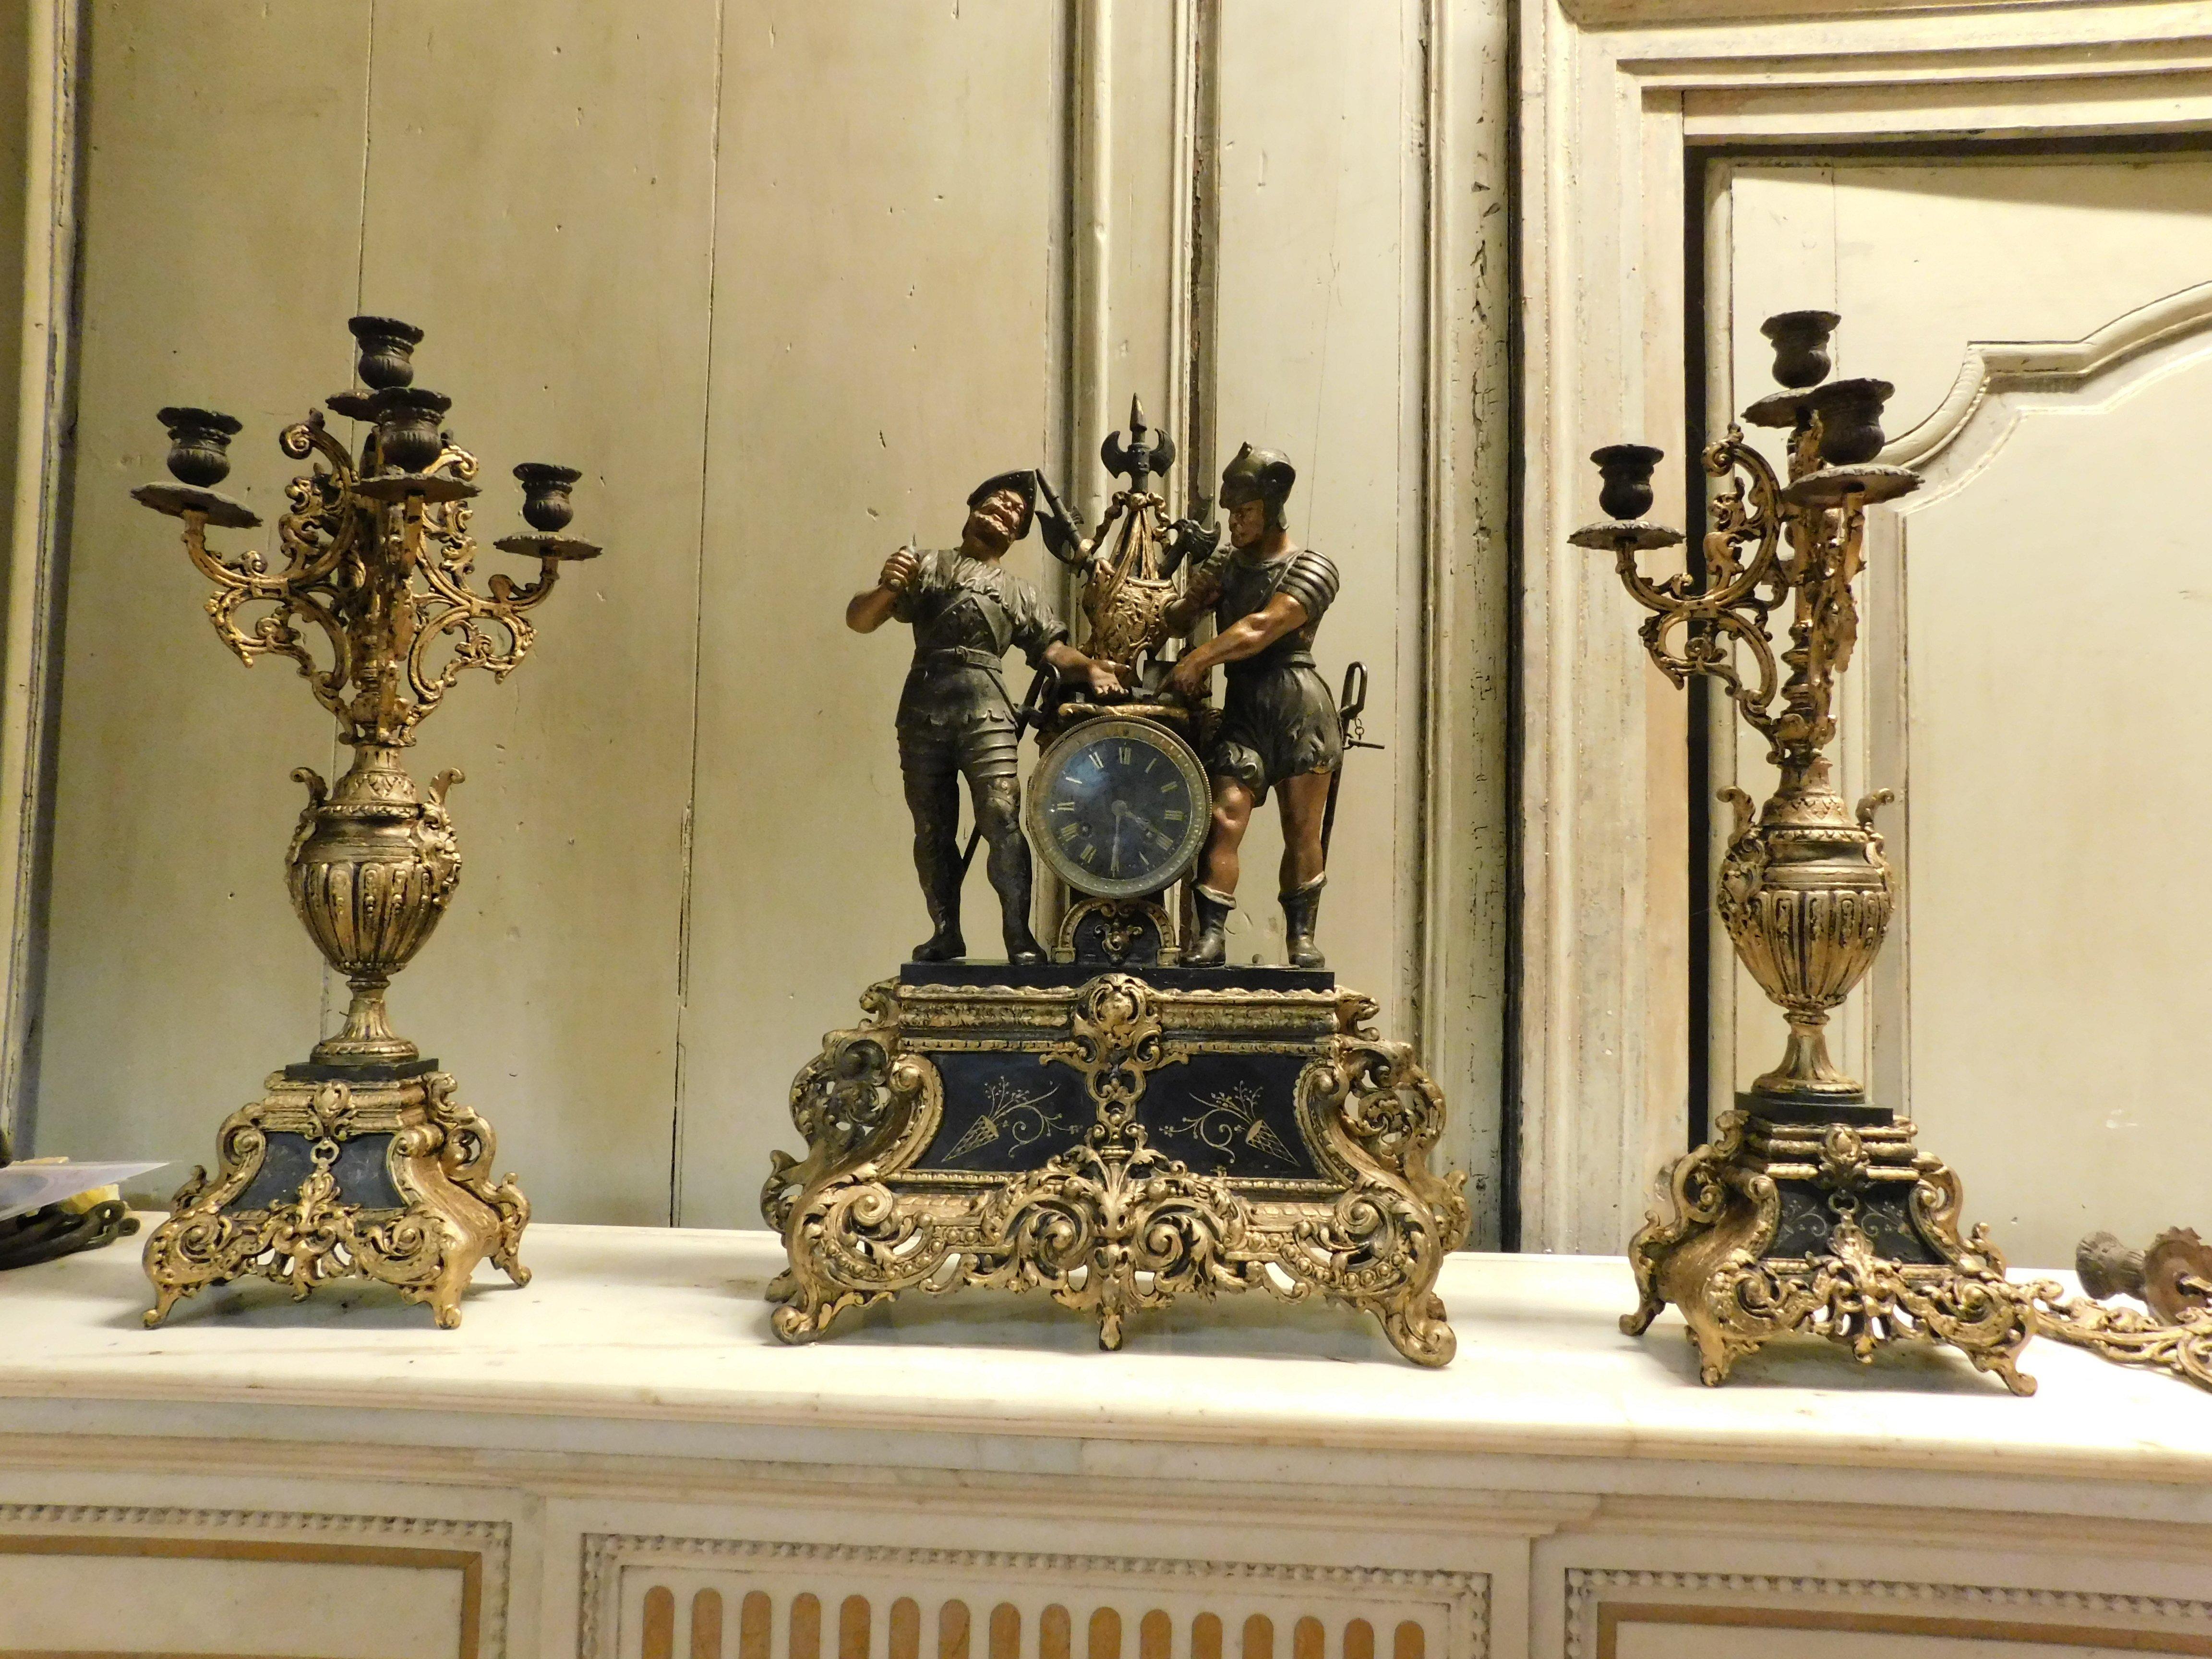 Ancient triptych over fireplace in richly sculpted, lacquered and gilded bronze, set consisting of 1 clock and 2 candlesticks, made by master craftsman in Italy in the second half of the 19th century, the clock measures cm w 43 x h 57 x d 15, the